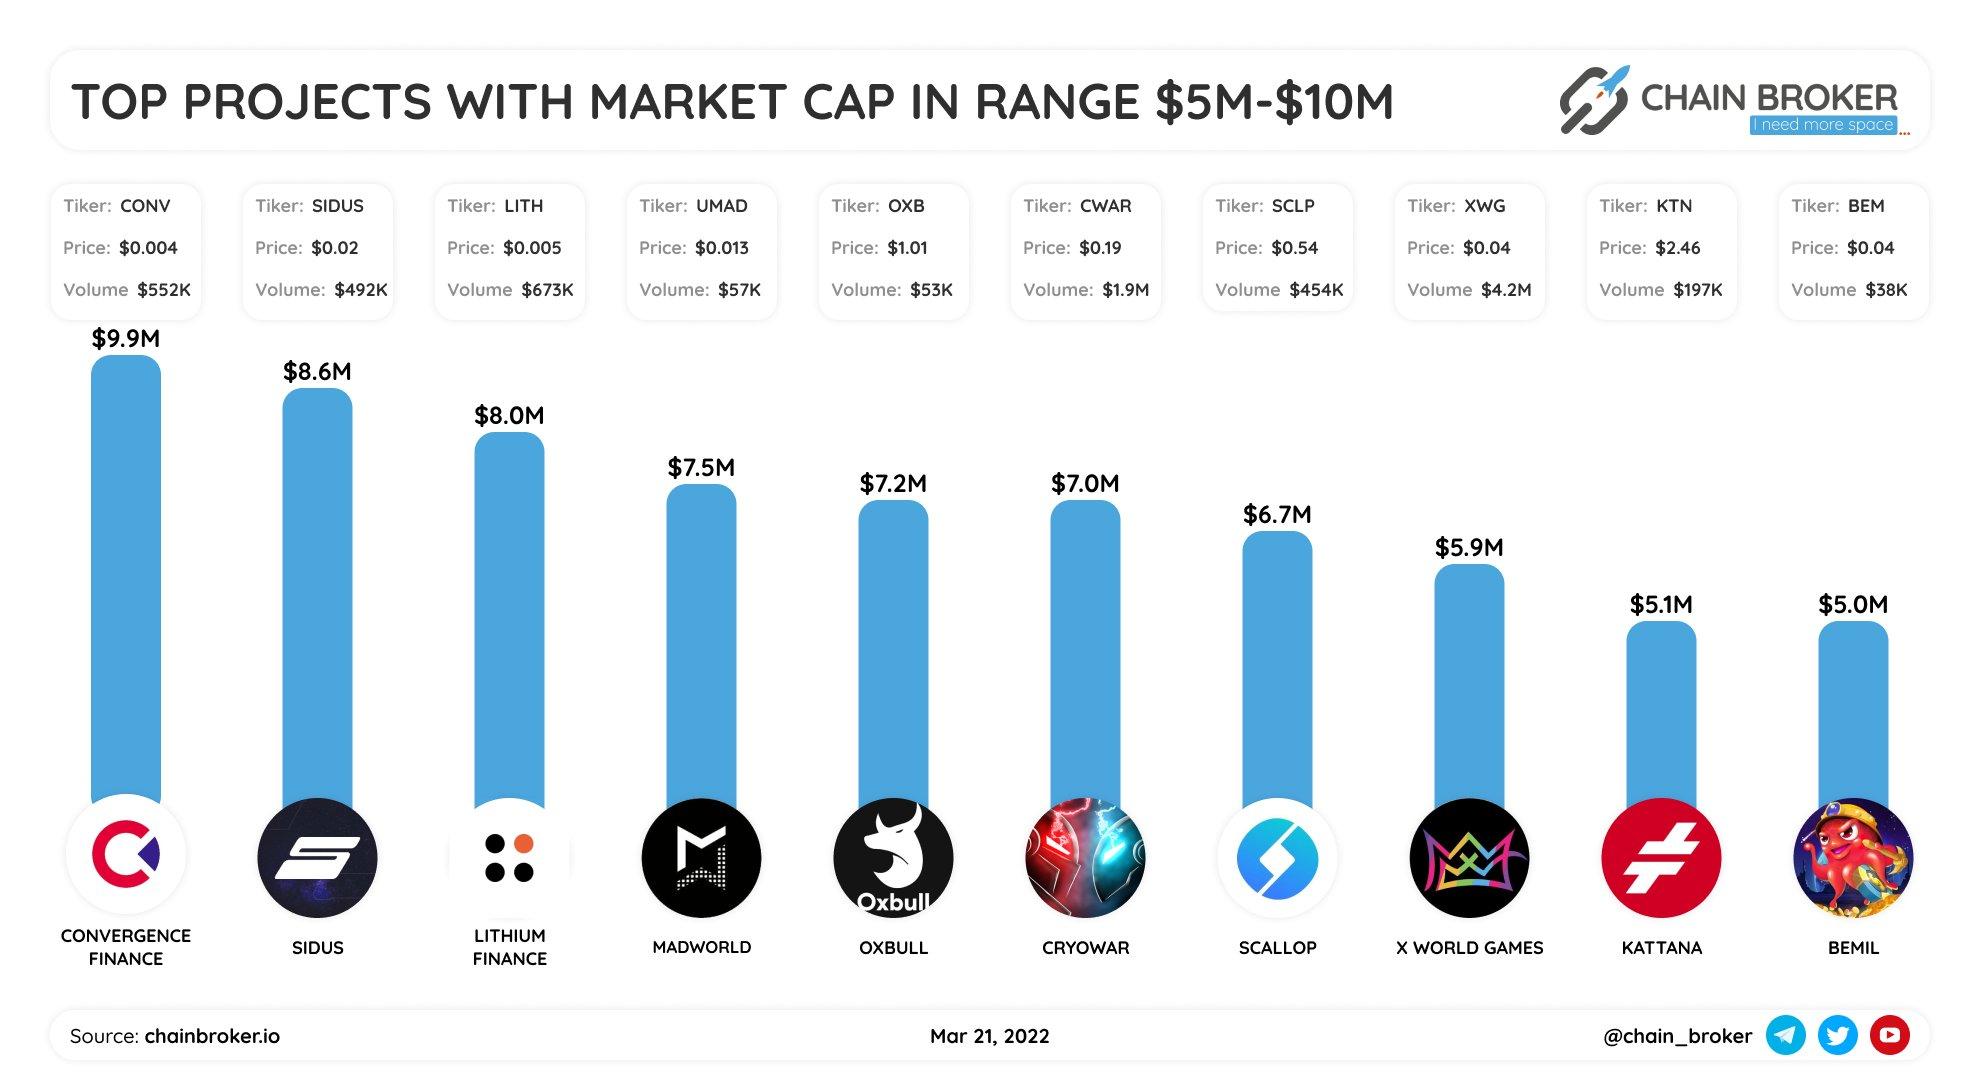 Top projects with Market cap $5M-$10M